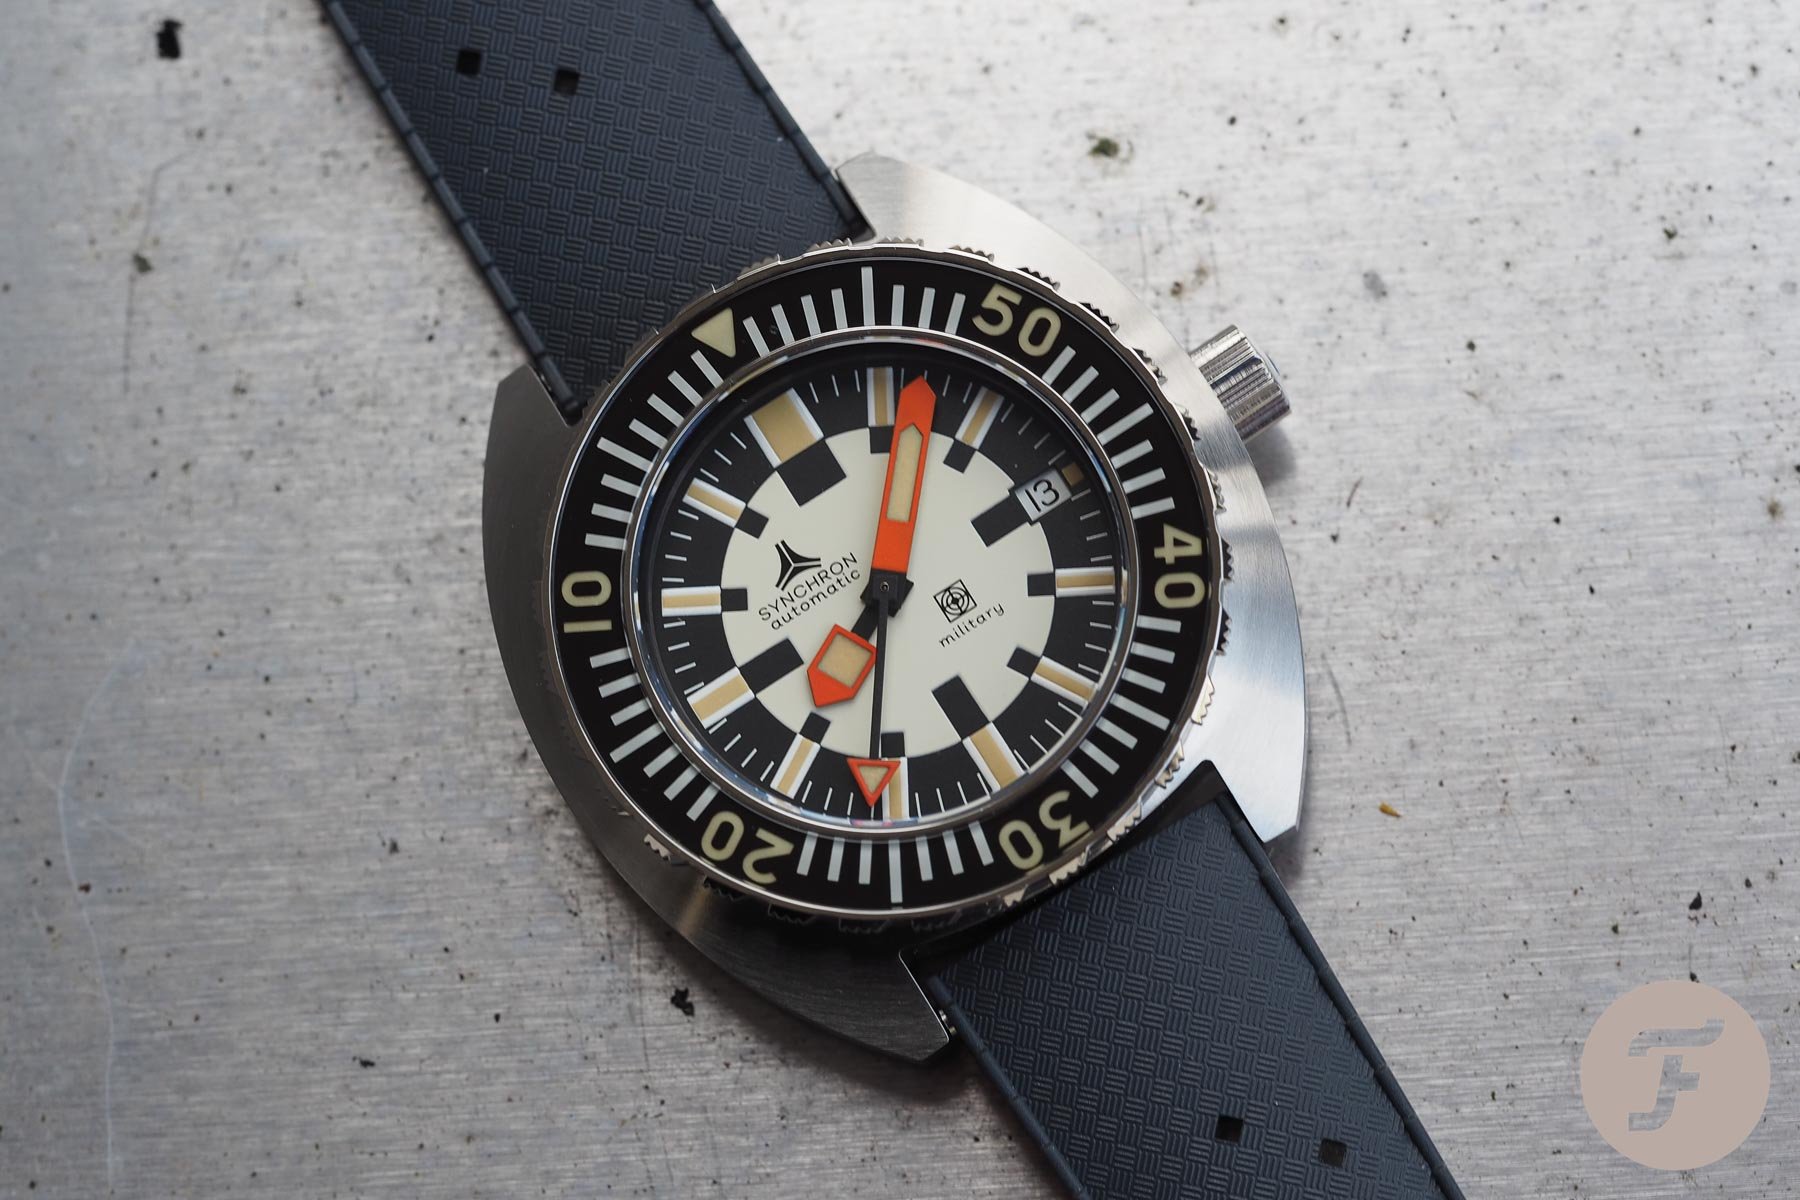 Synchron Military Diver: Hands-On With A Controversial New Watch Release